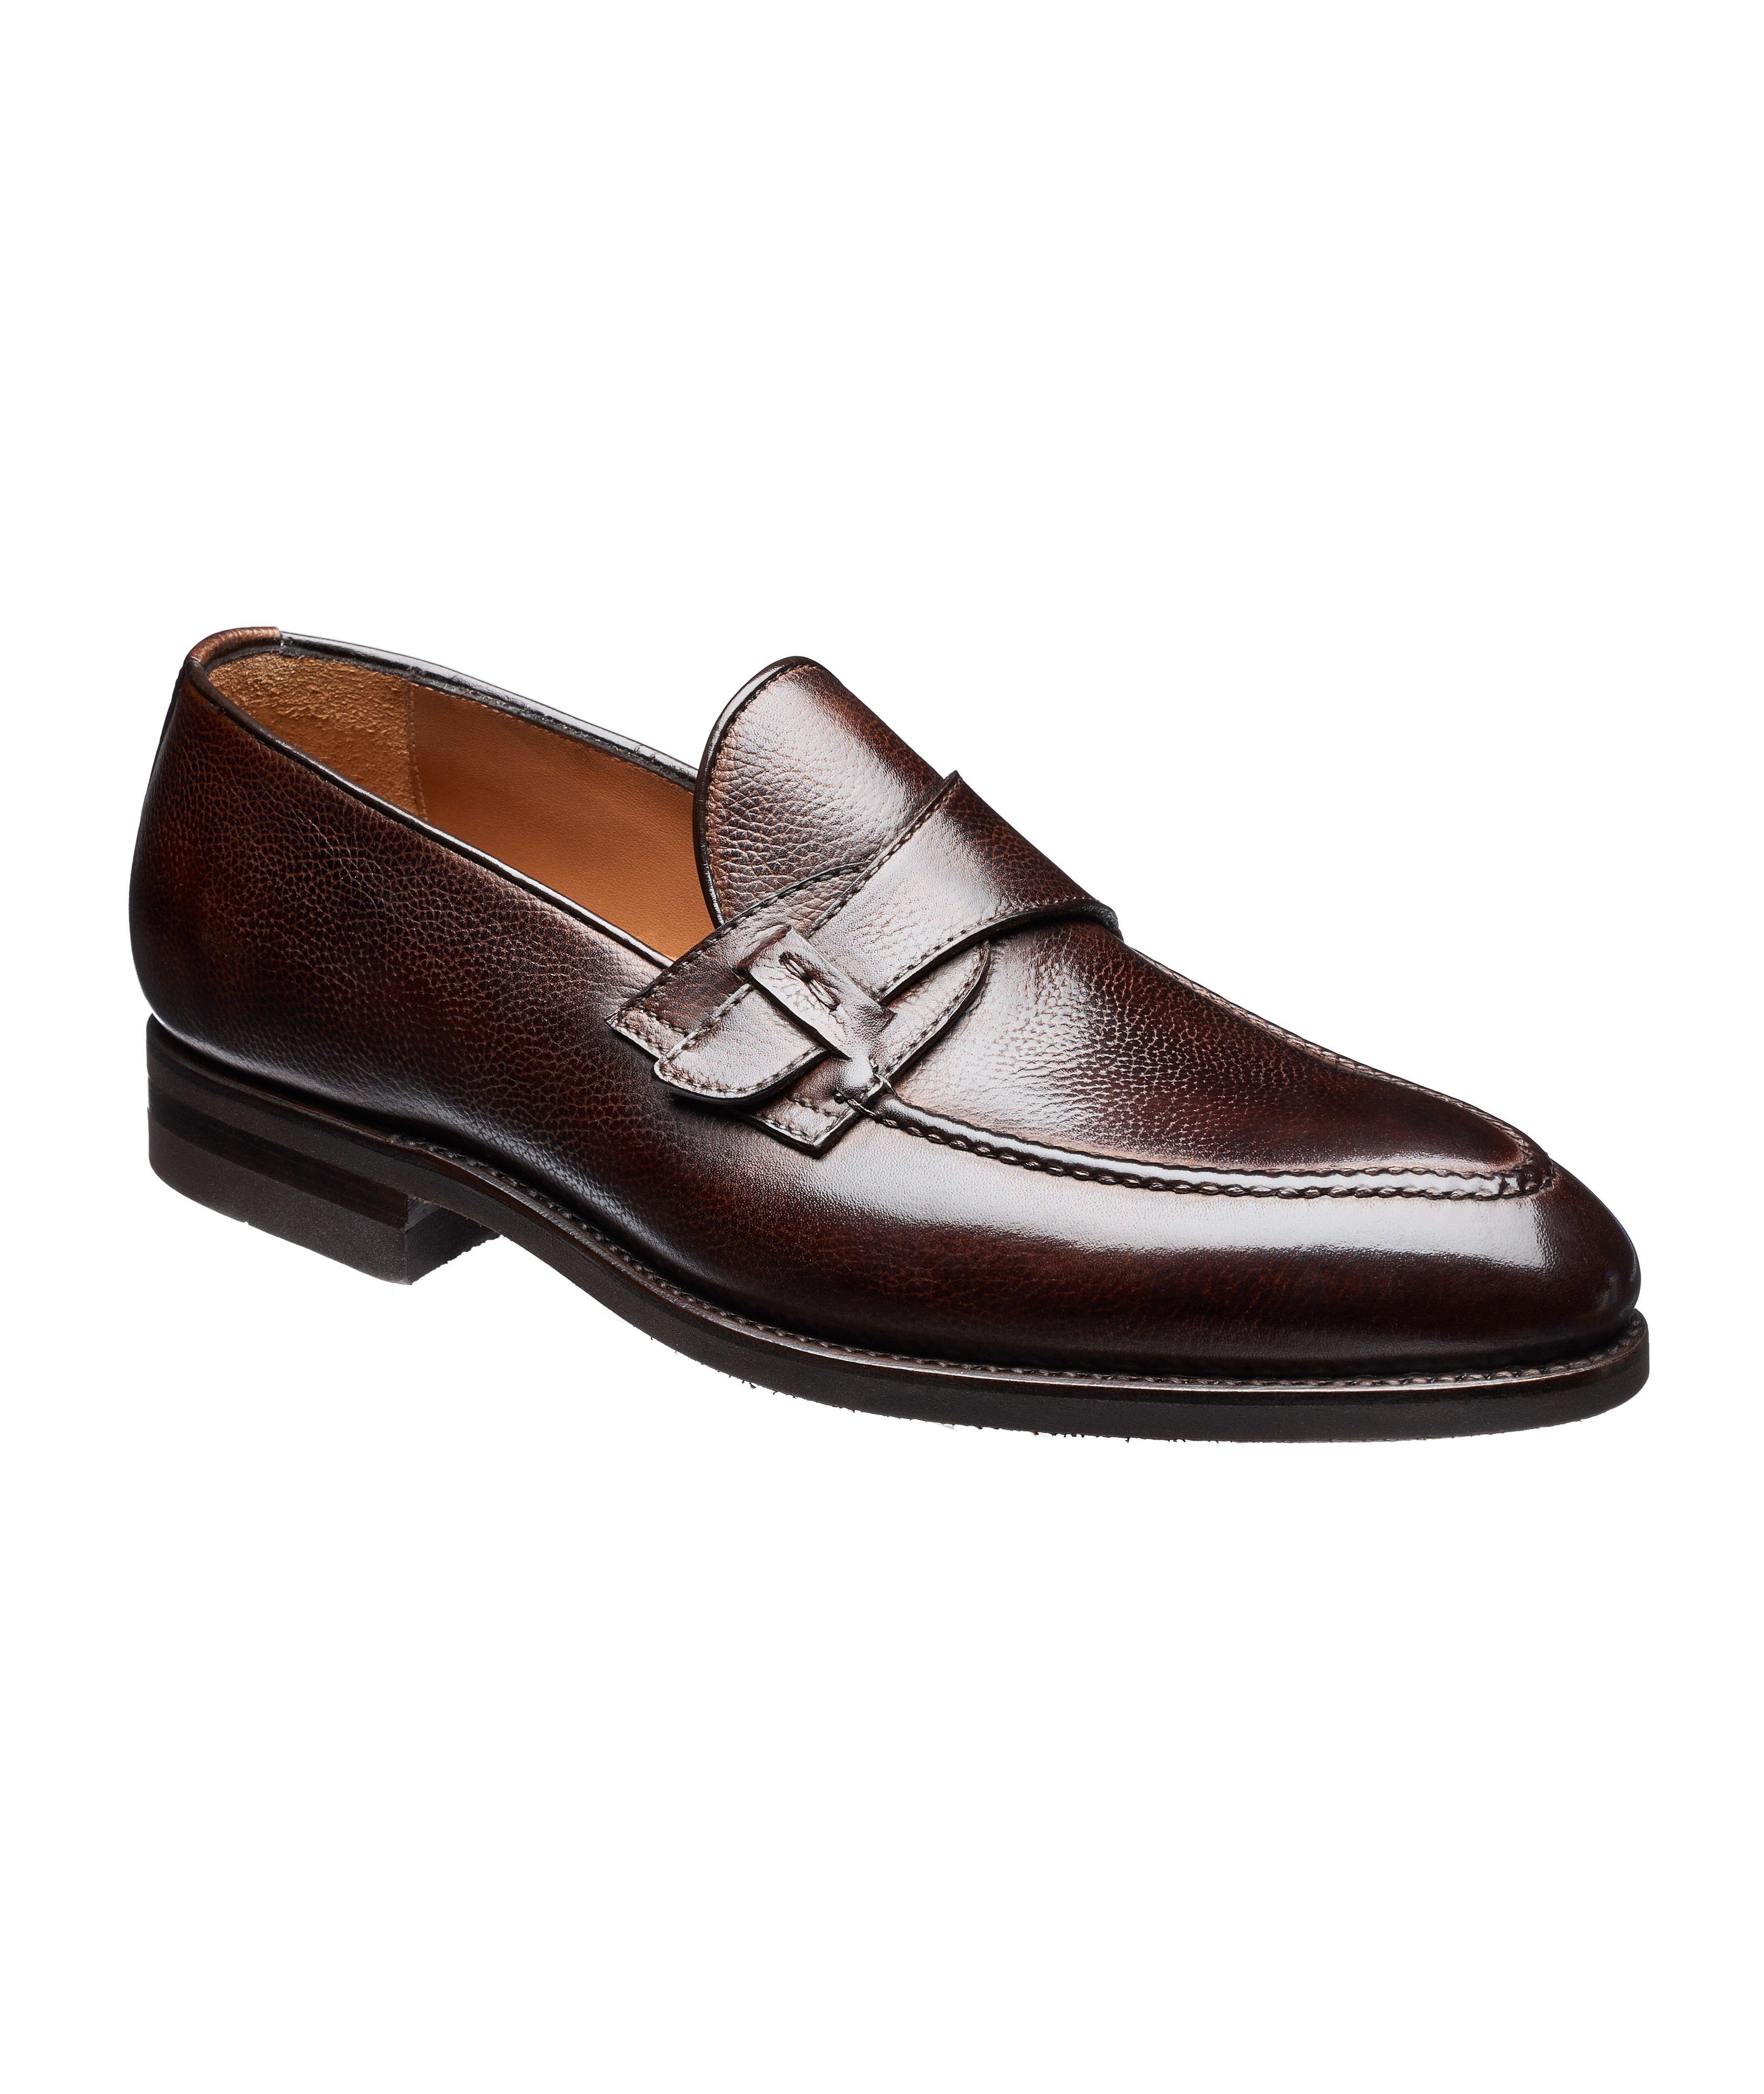 Riviera Pebble Grain Leather Loafers image 0